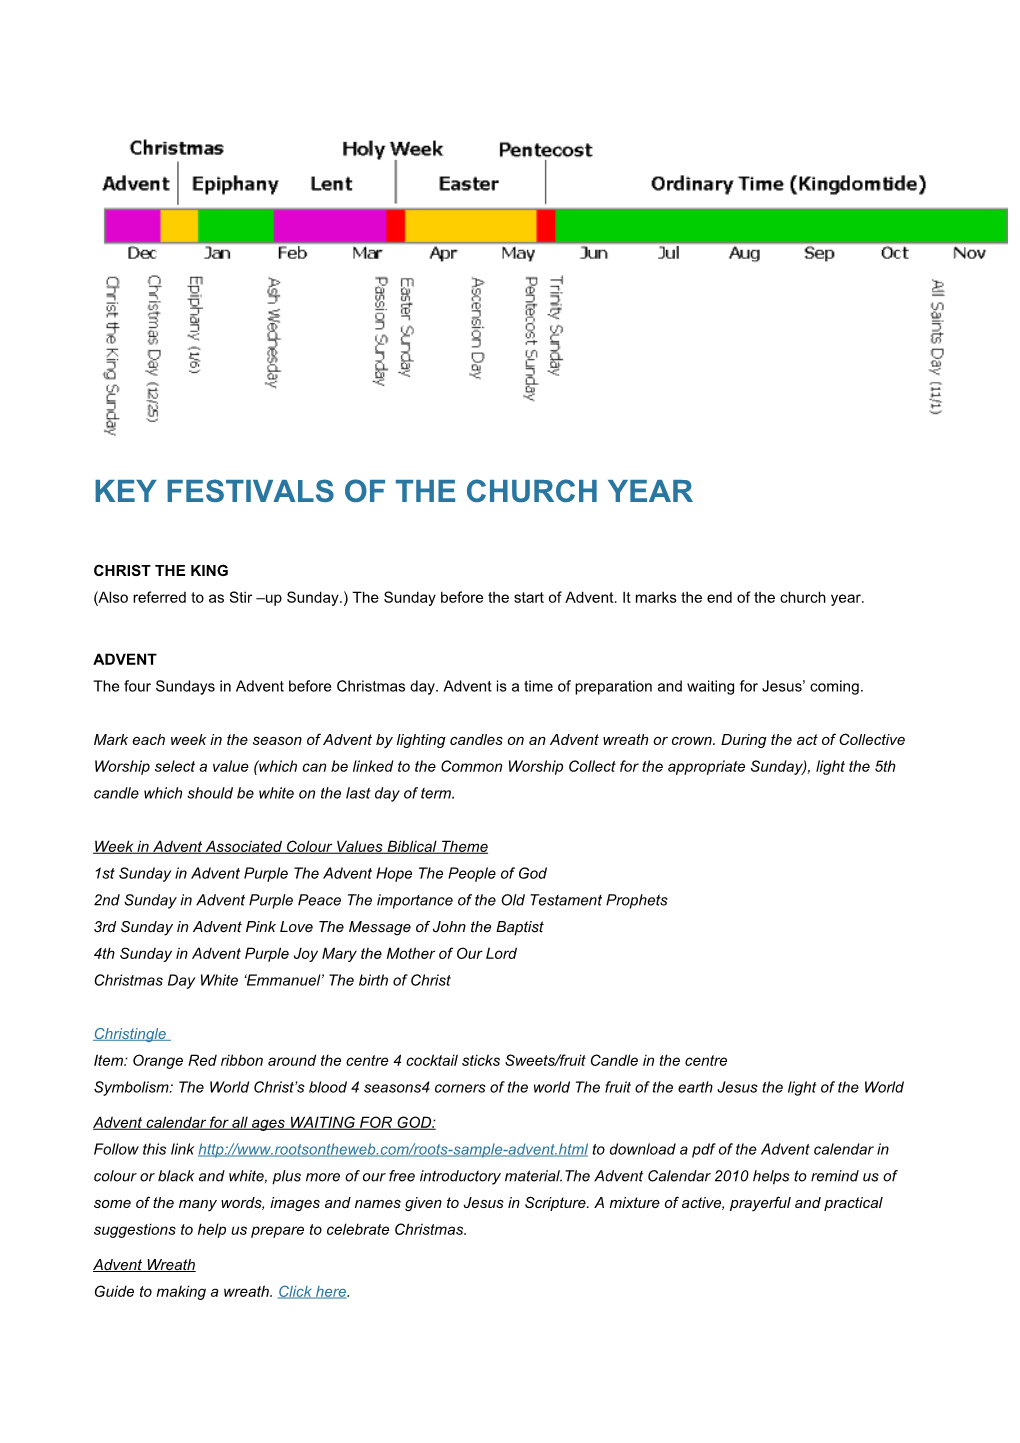 Key Festivals of Thechurch Year